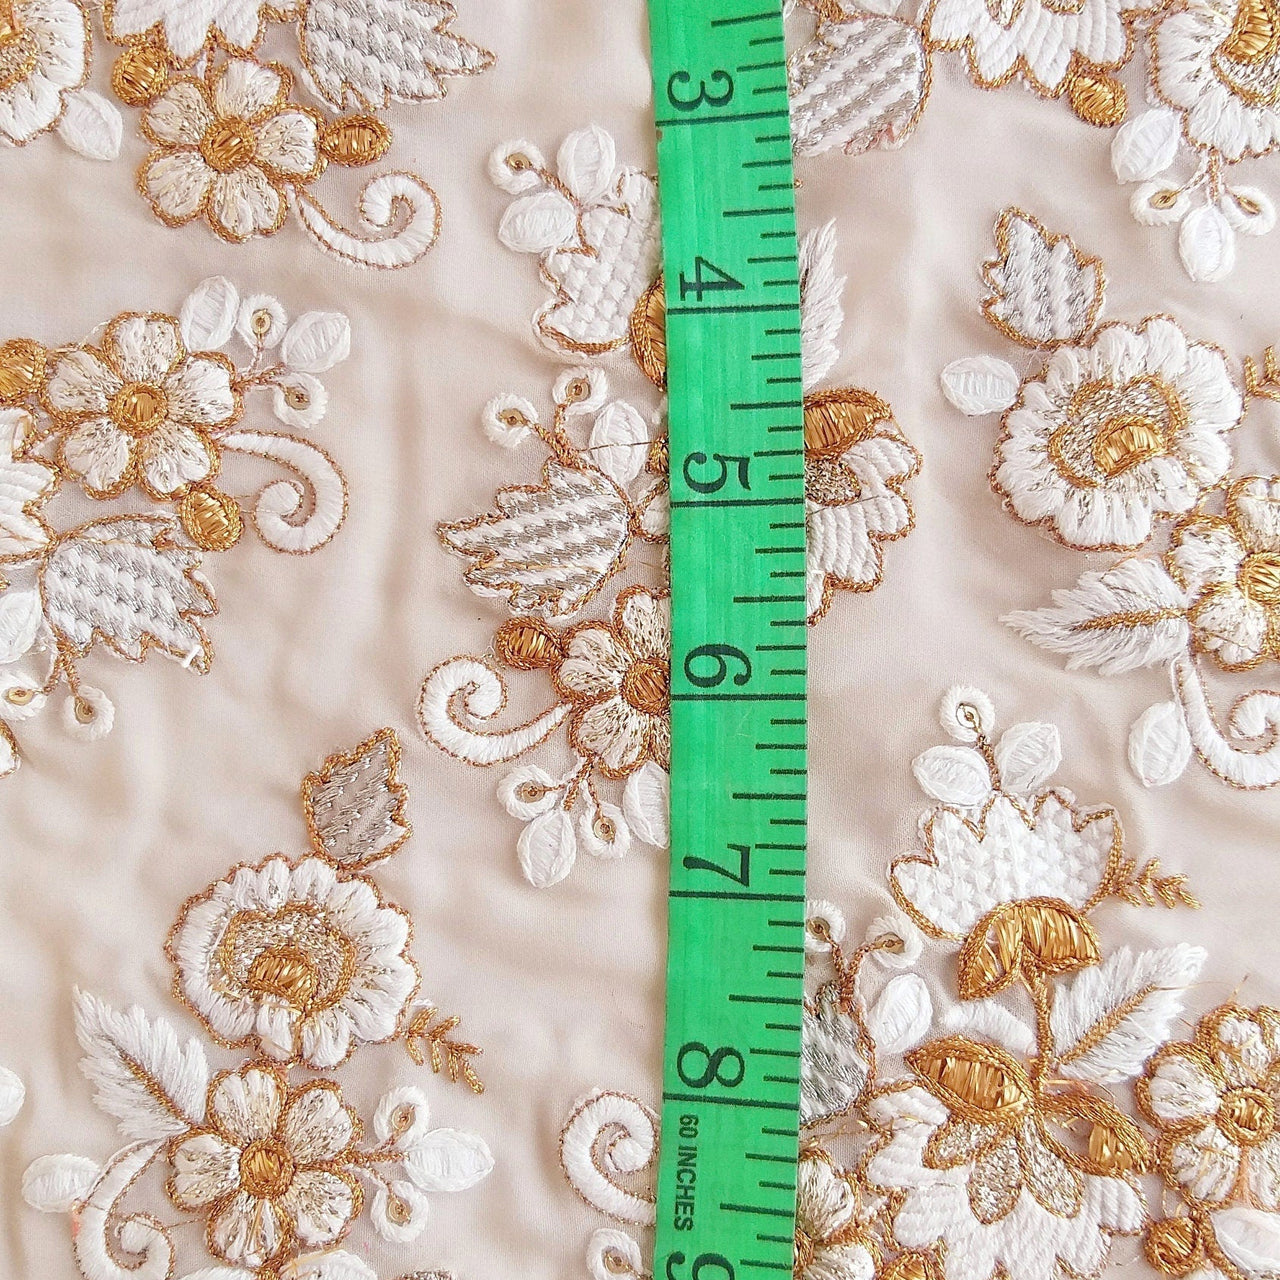 Beige Lace With Floral Embroidery In Off White And Bronze Work, Embroidered Trim, 1 Yard Trim